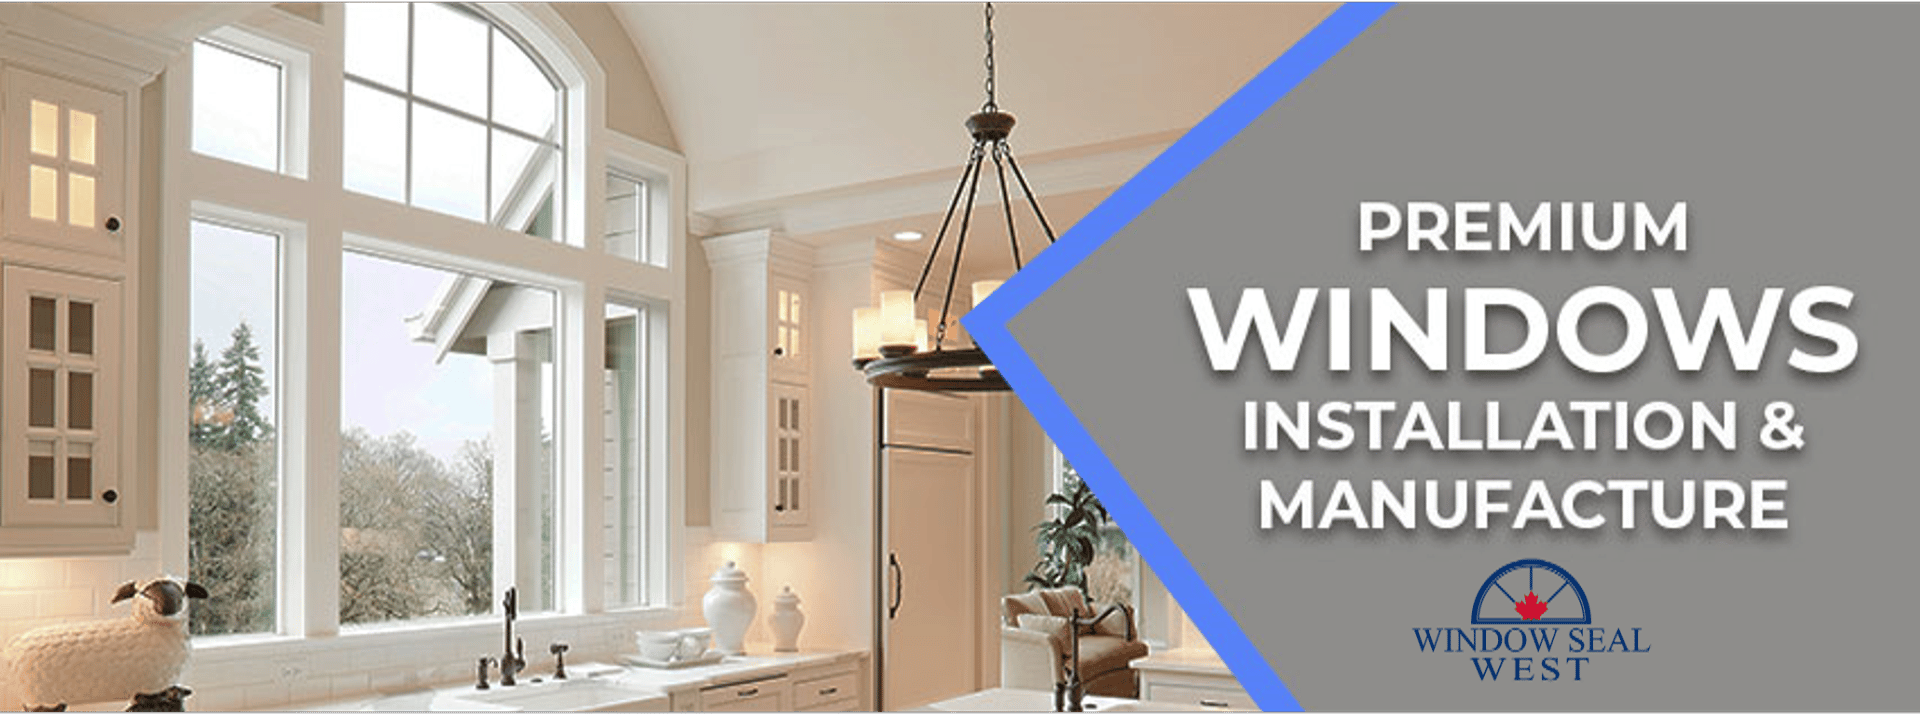 Replacement Windows and Installation Services